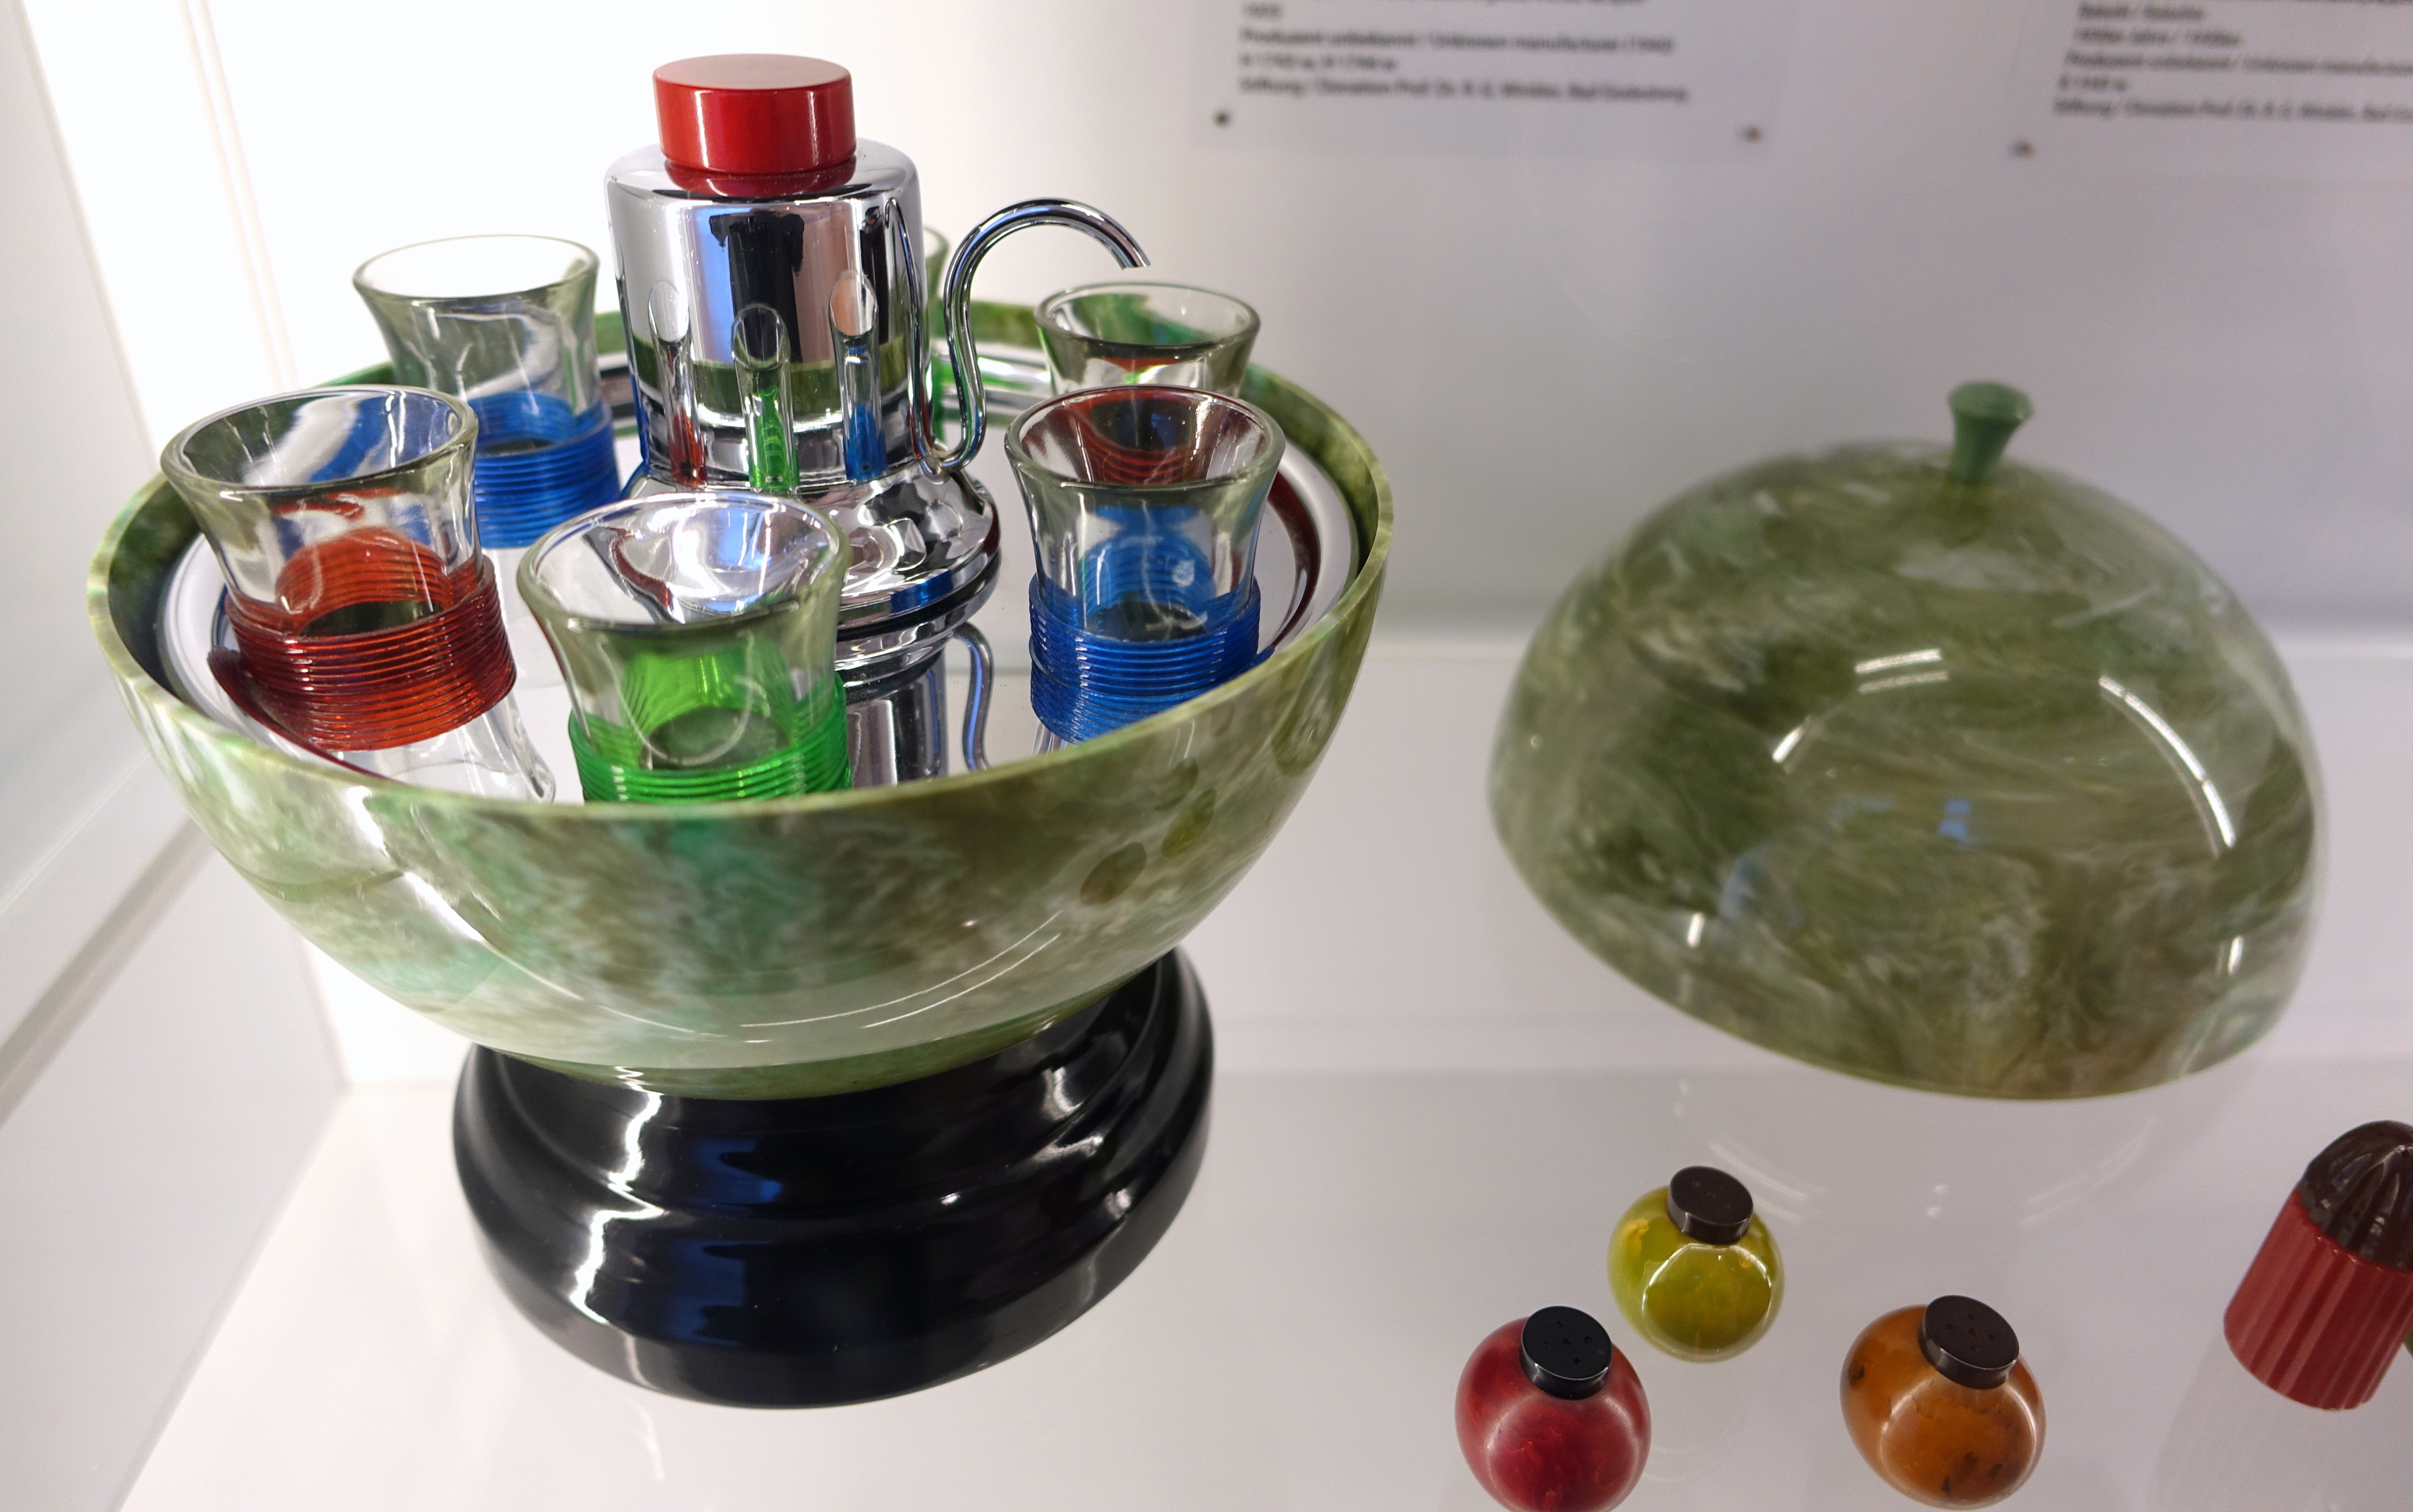 File:Minibar and glasses, 2 of 2, unknown manufacturer, 1935, chrome-plated  brass, Catalin, glass, metal, lacquer - Museum für Angewandte Kunst Köln -  Cologne, Germany - DSC09443.jpg - Wikimedia Commons